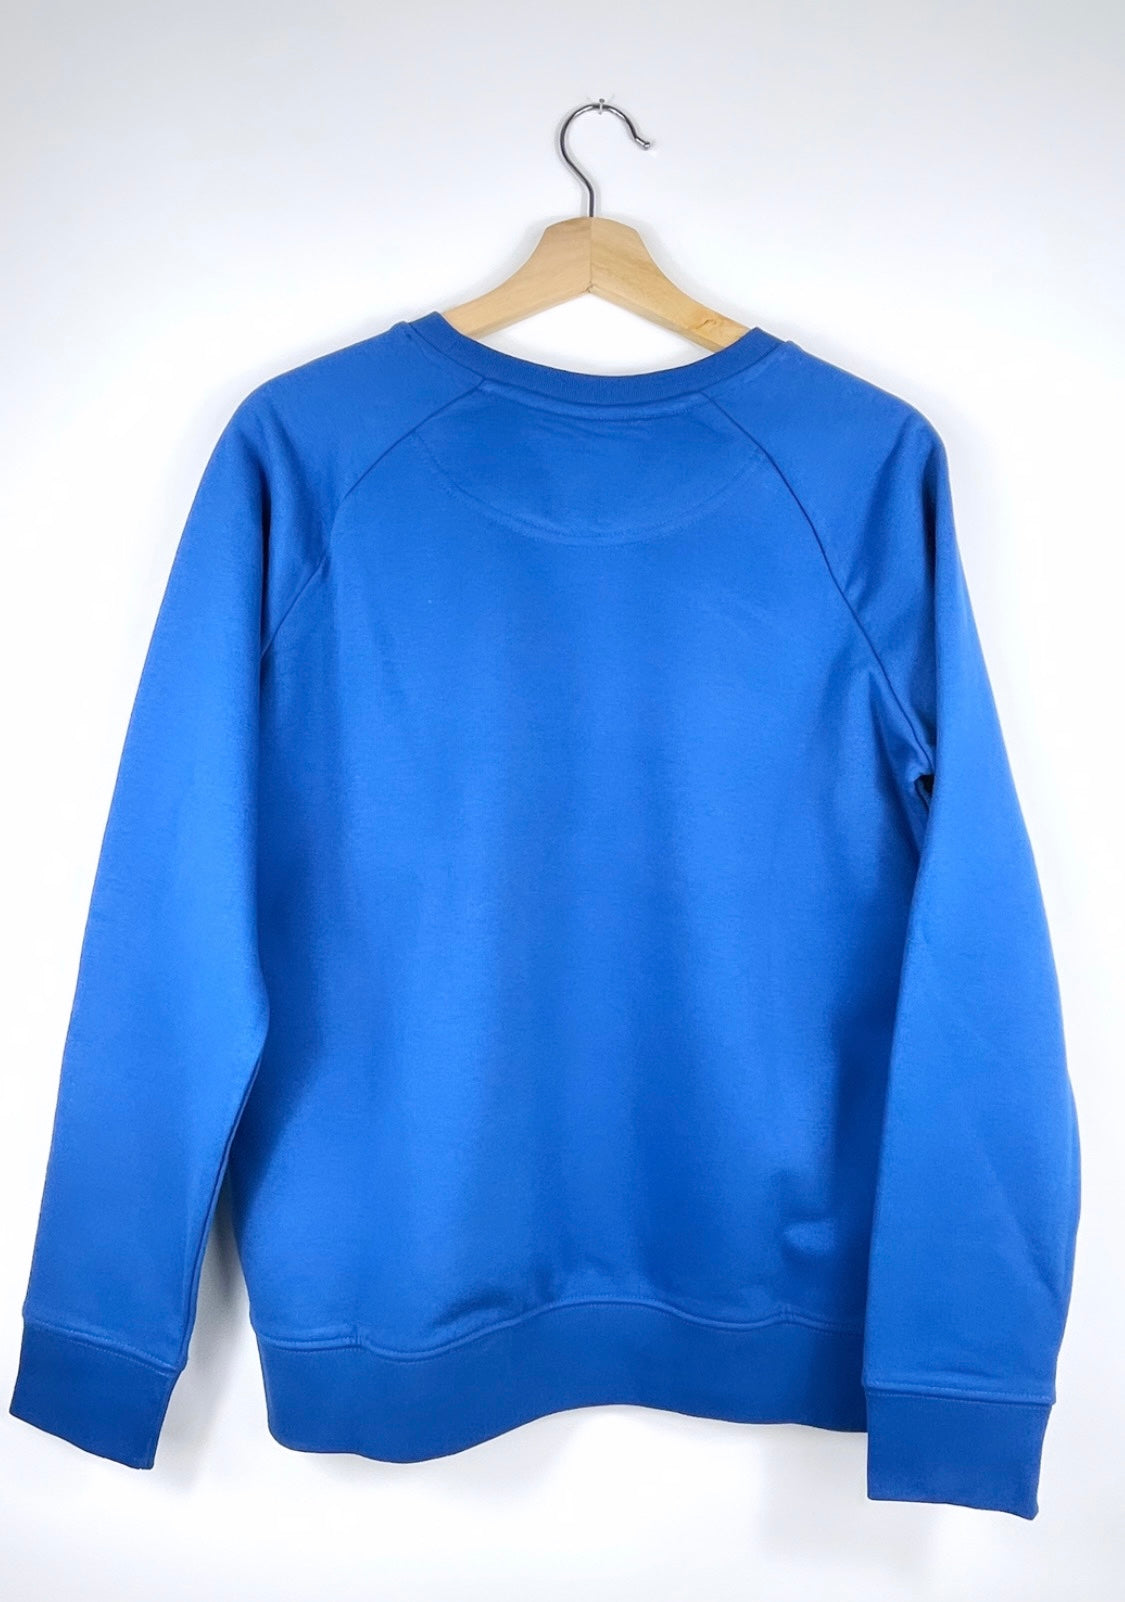 Everyday like Run Day Sweater Gr. M | Loopback by Allstridesin